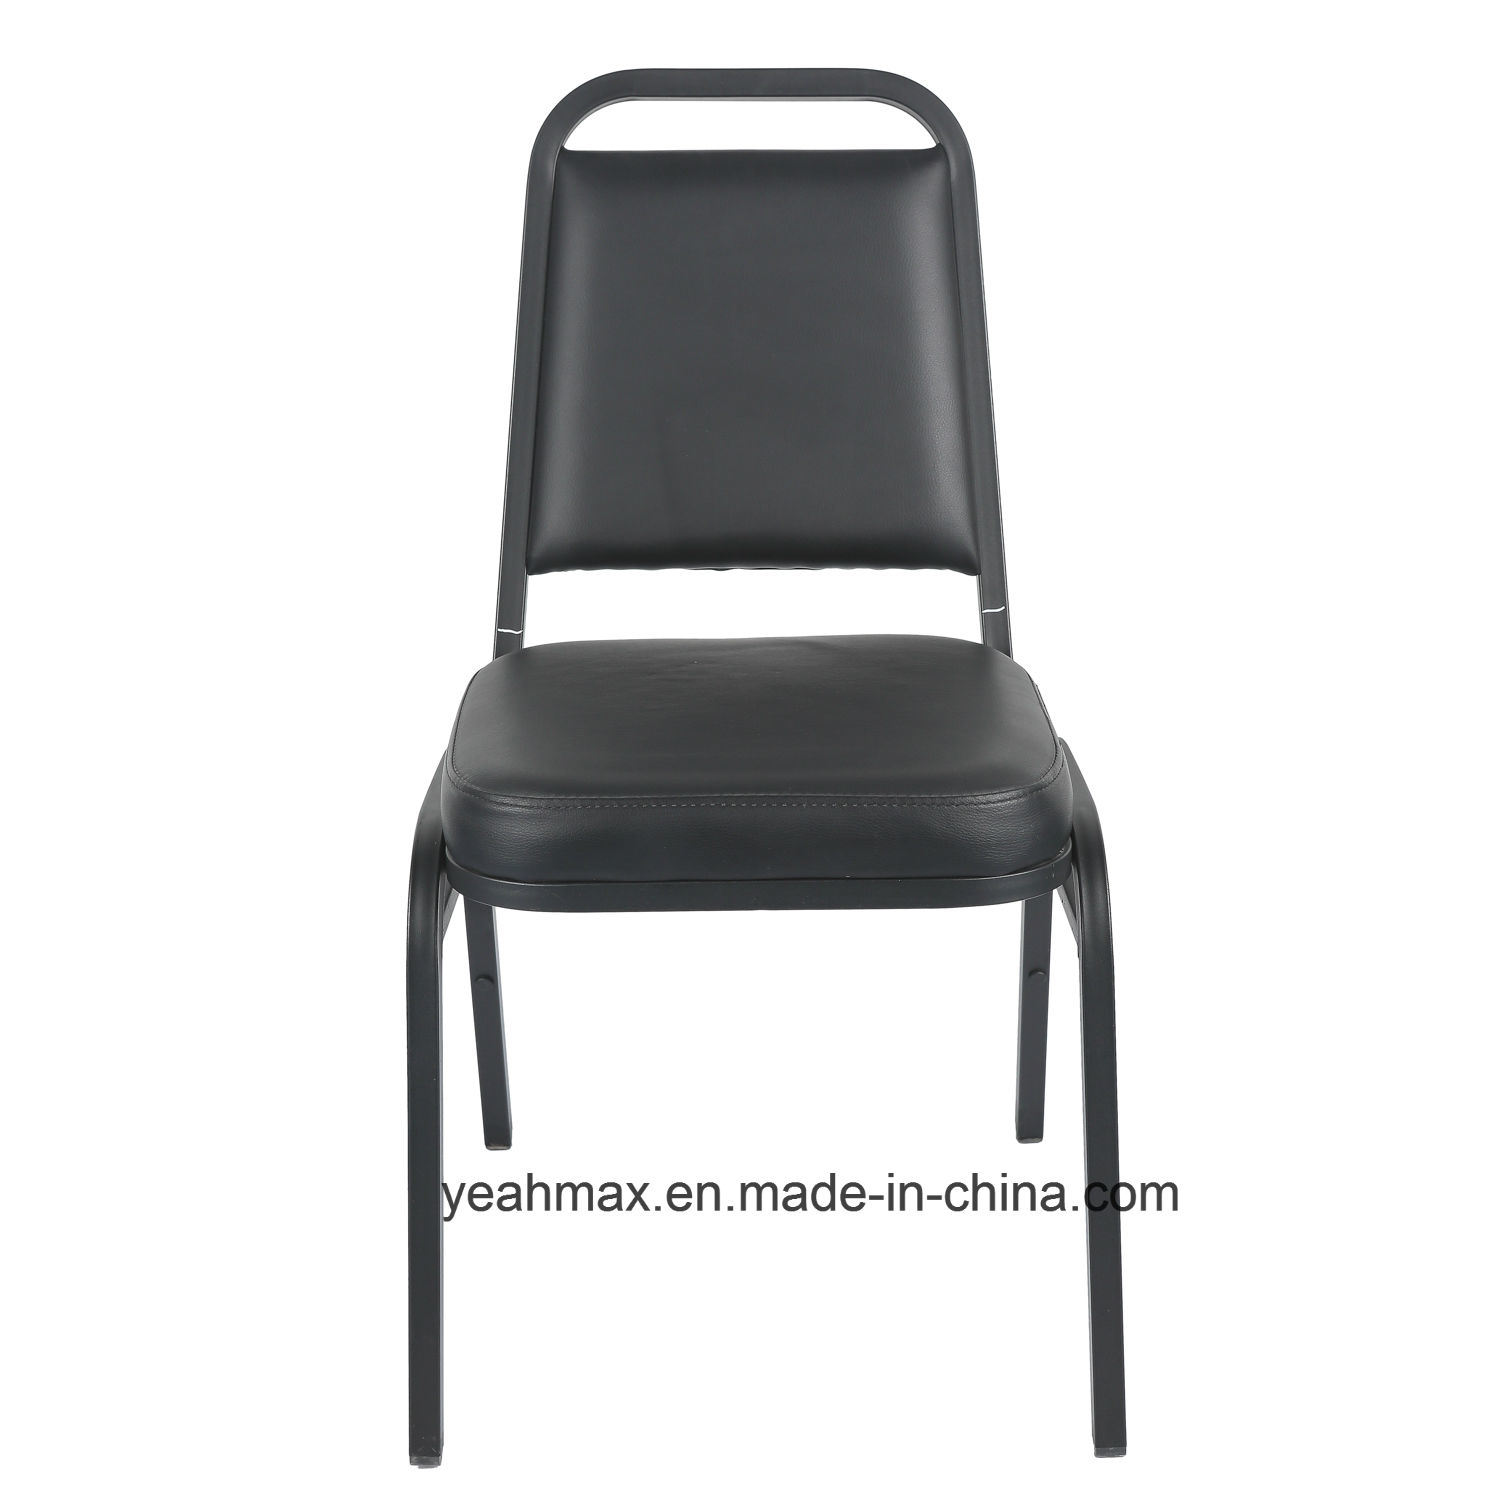 Diningg Chair for Restaurant with Sturdy Powder-Coated Metal Frame